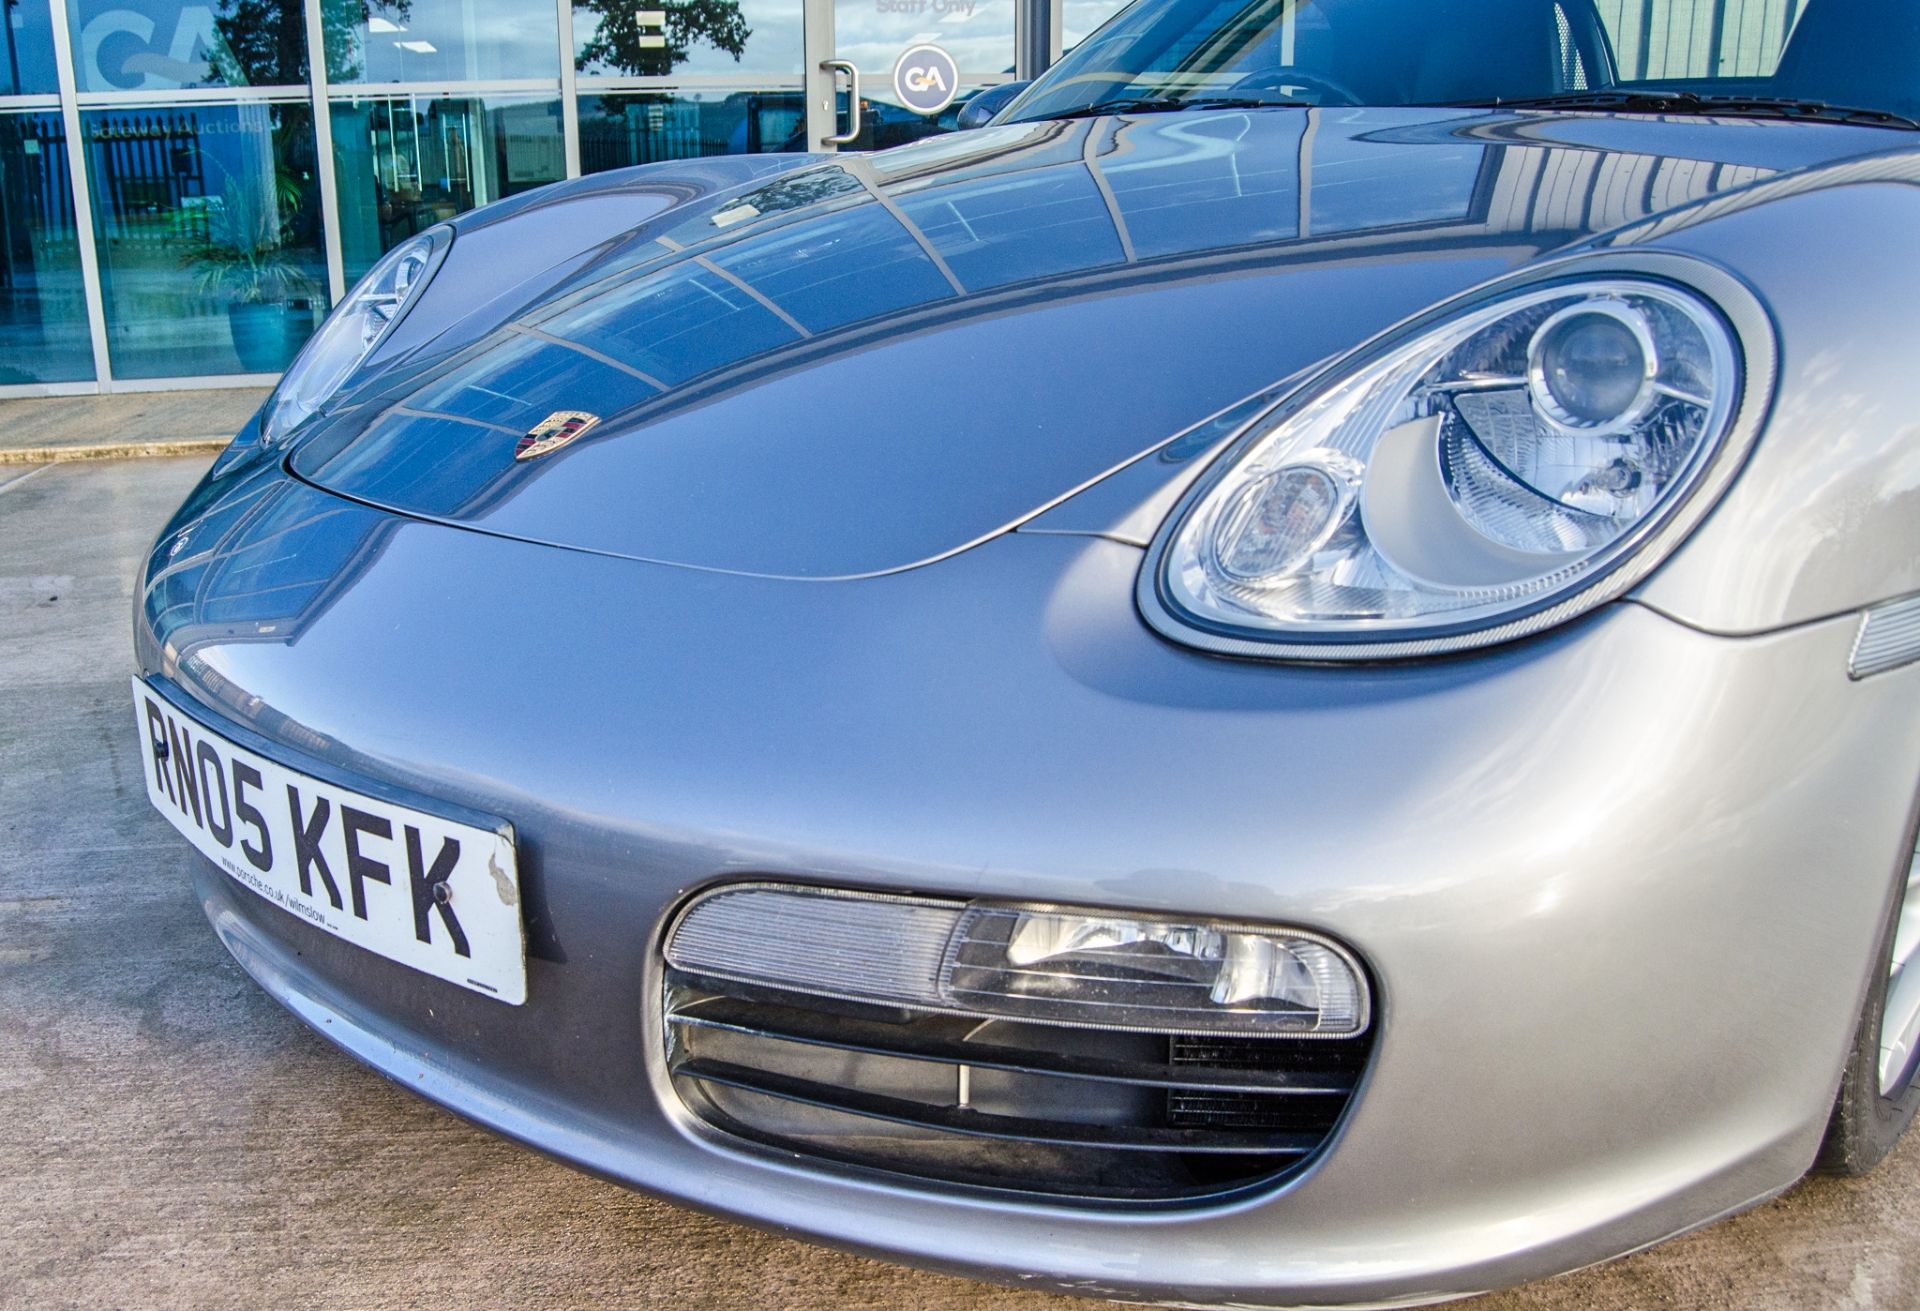 Porsche Boxster 2.7 litre 5 speed manual convertible roadster Registration Number: RN05 KFK Date - Image 17 of 45